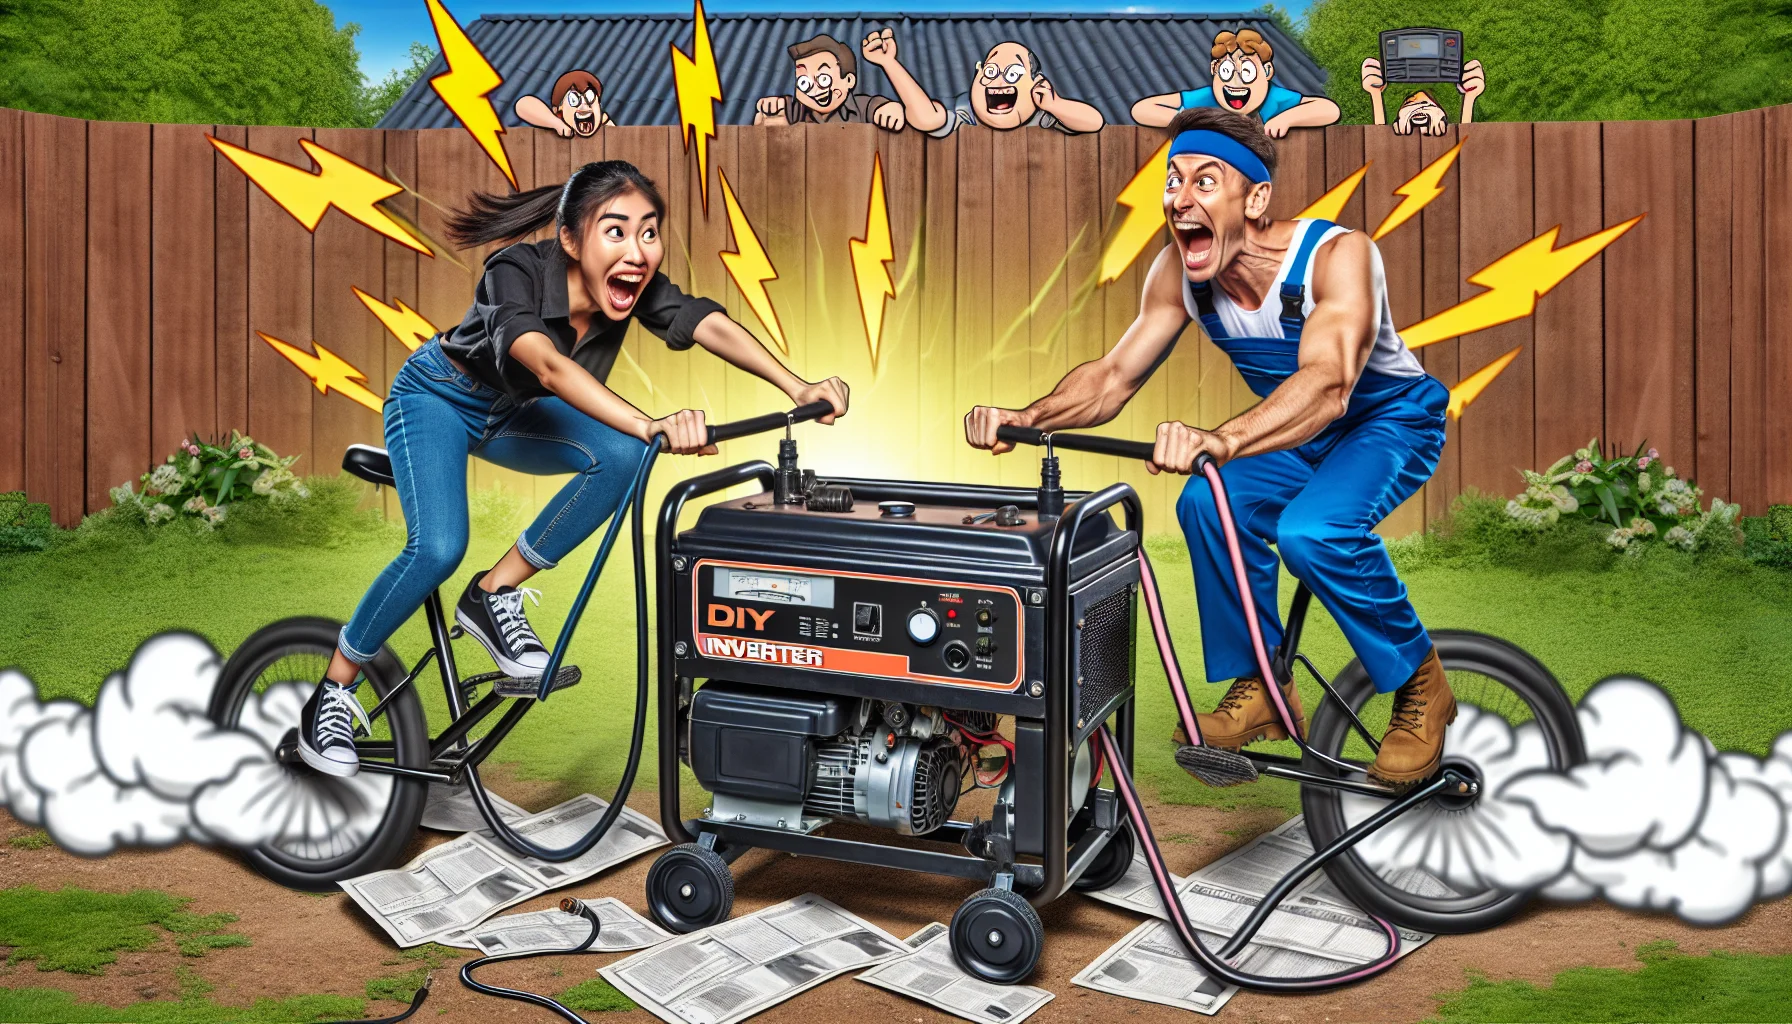 Create an energetic and amusing image of a DIY inverter generator being manually powered by a Caucasian man and an Asian woman, both in work attire, unbeatable in their joy. They are pushing pedals on either side of the generator as if it is a cycle, generating electricity. Sparks of electricity are humorously styled like cartoon lightning bolts flying out from the cables. Scattered around the generator are saved electricity bills, their covers designed like comical expressions. The background is a typical suburban yard, green and sunny, with locals peeping over the fence, their faces filled with amazement and laughter.